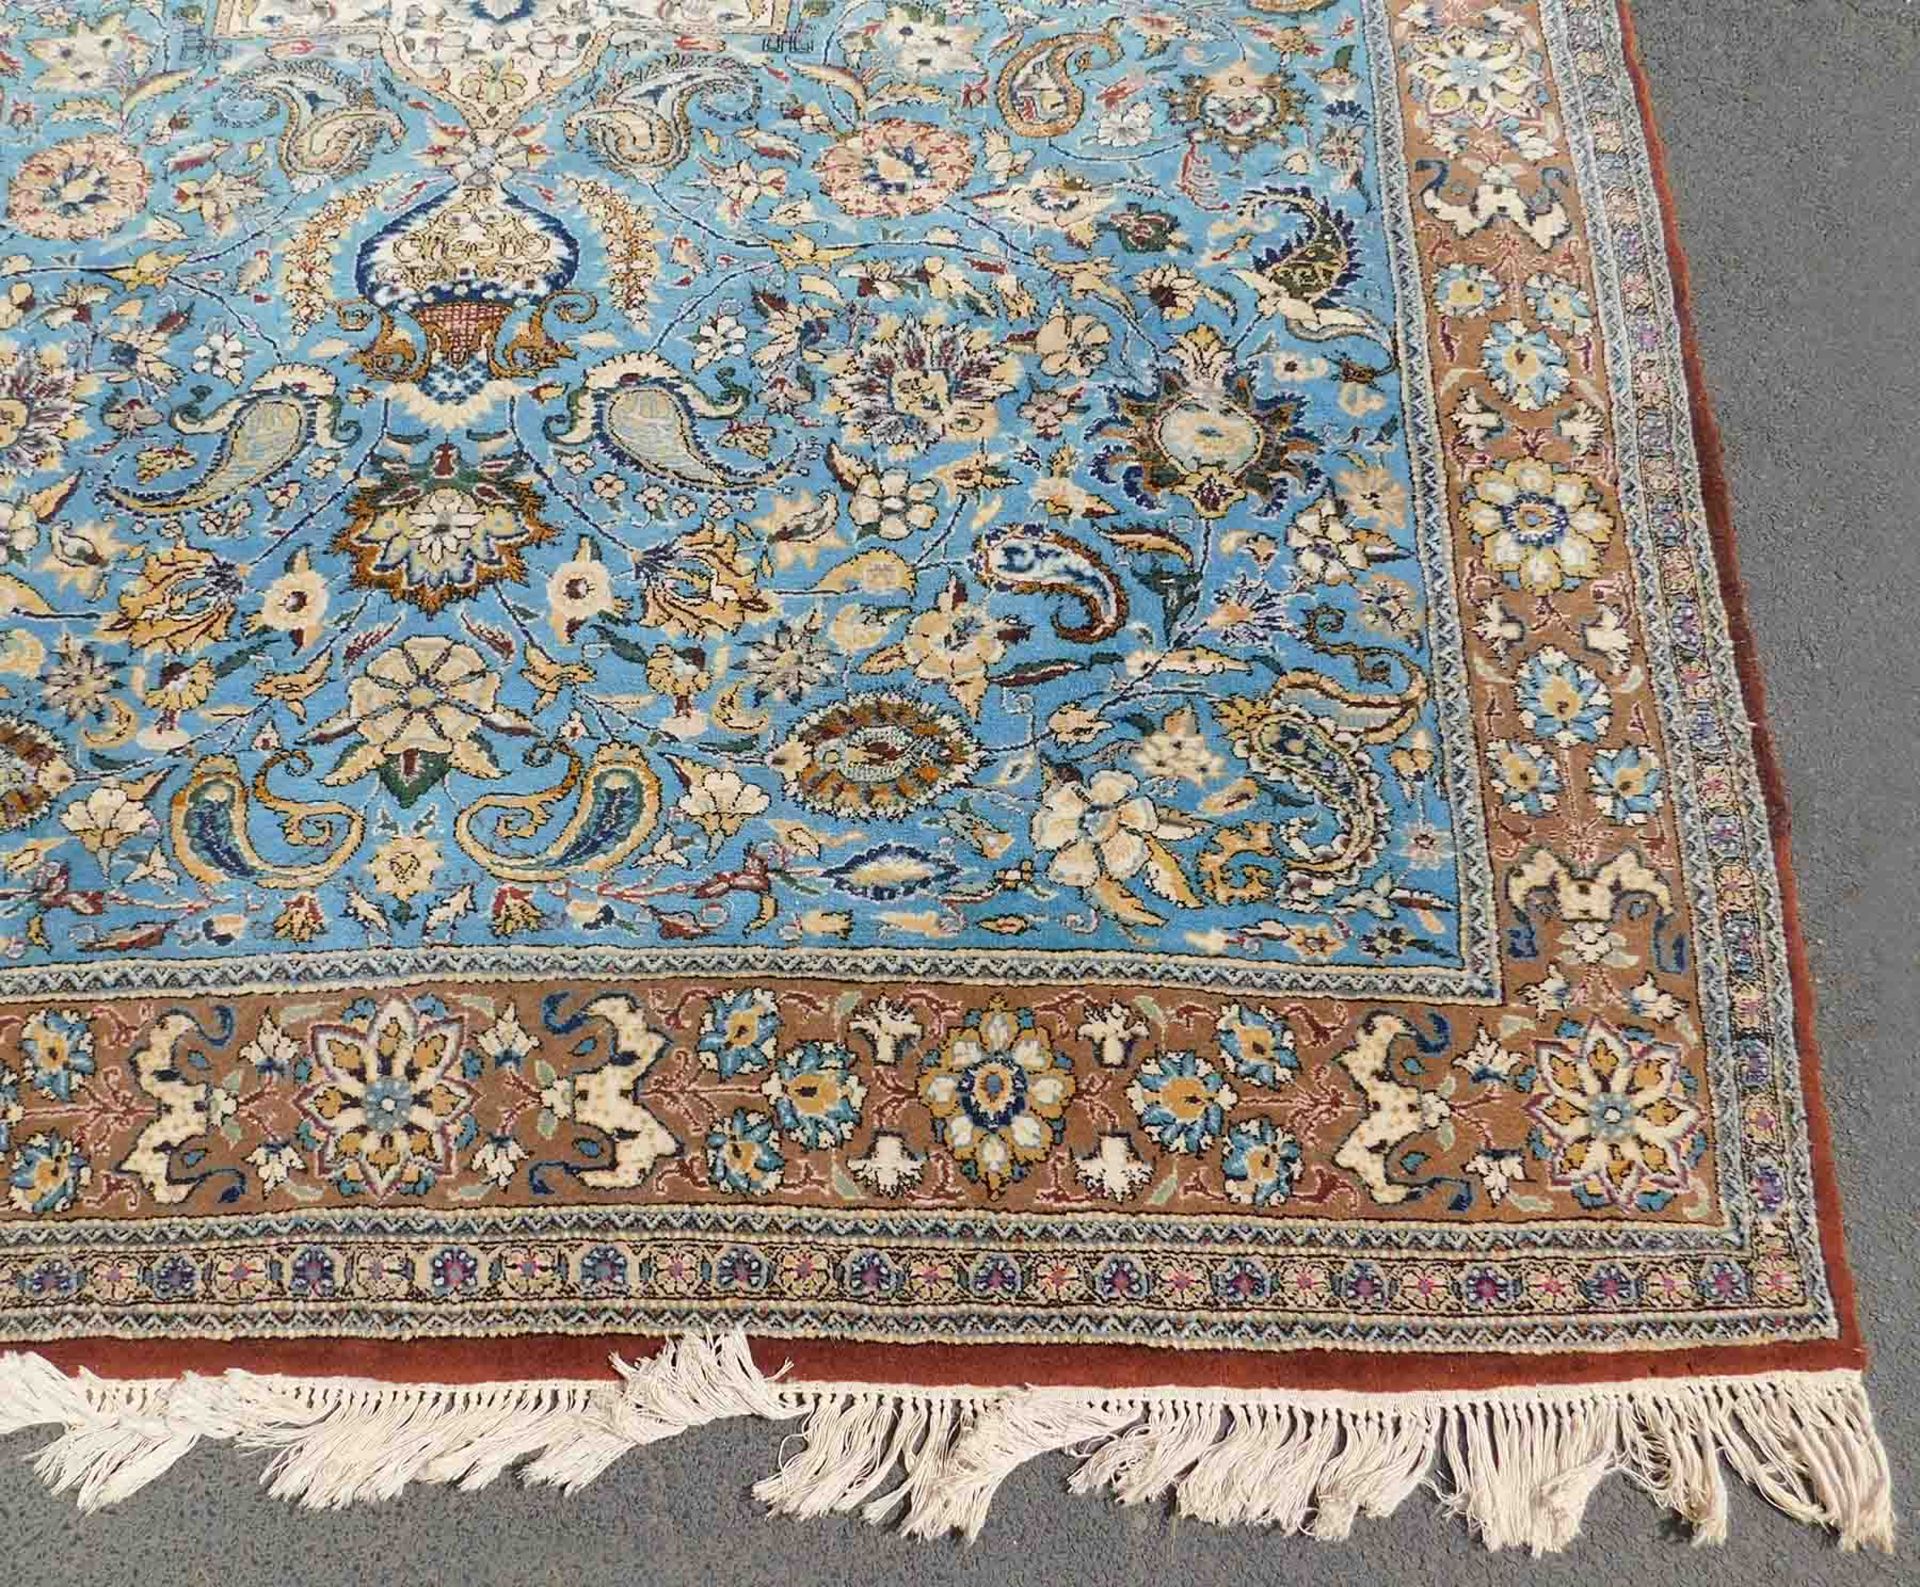 Ghum Persian rug. Iran. Very fine weave. Old, mid 20th century.333 cm x 211 cm. Knotted by hand. - Image 3 of 8